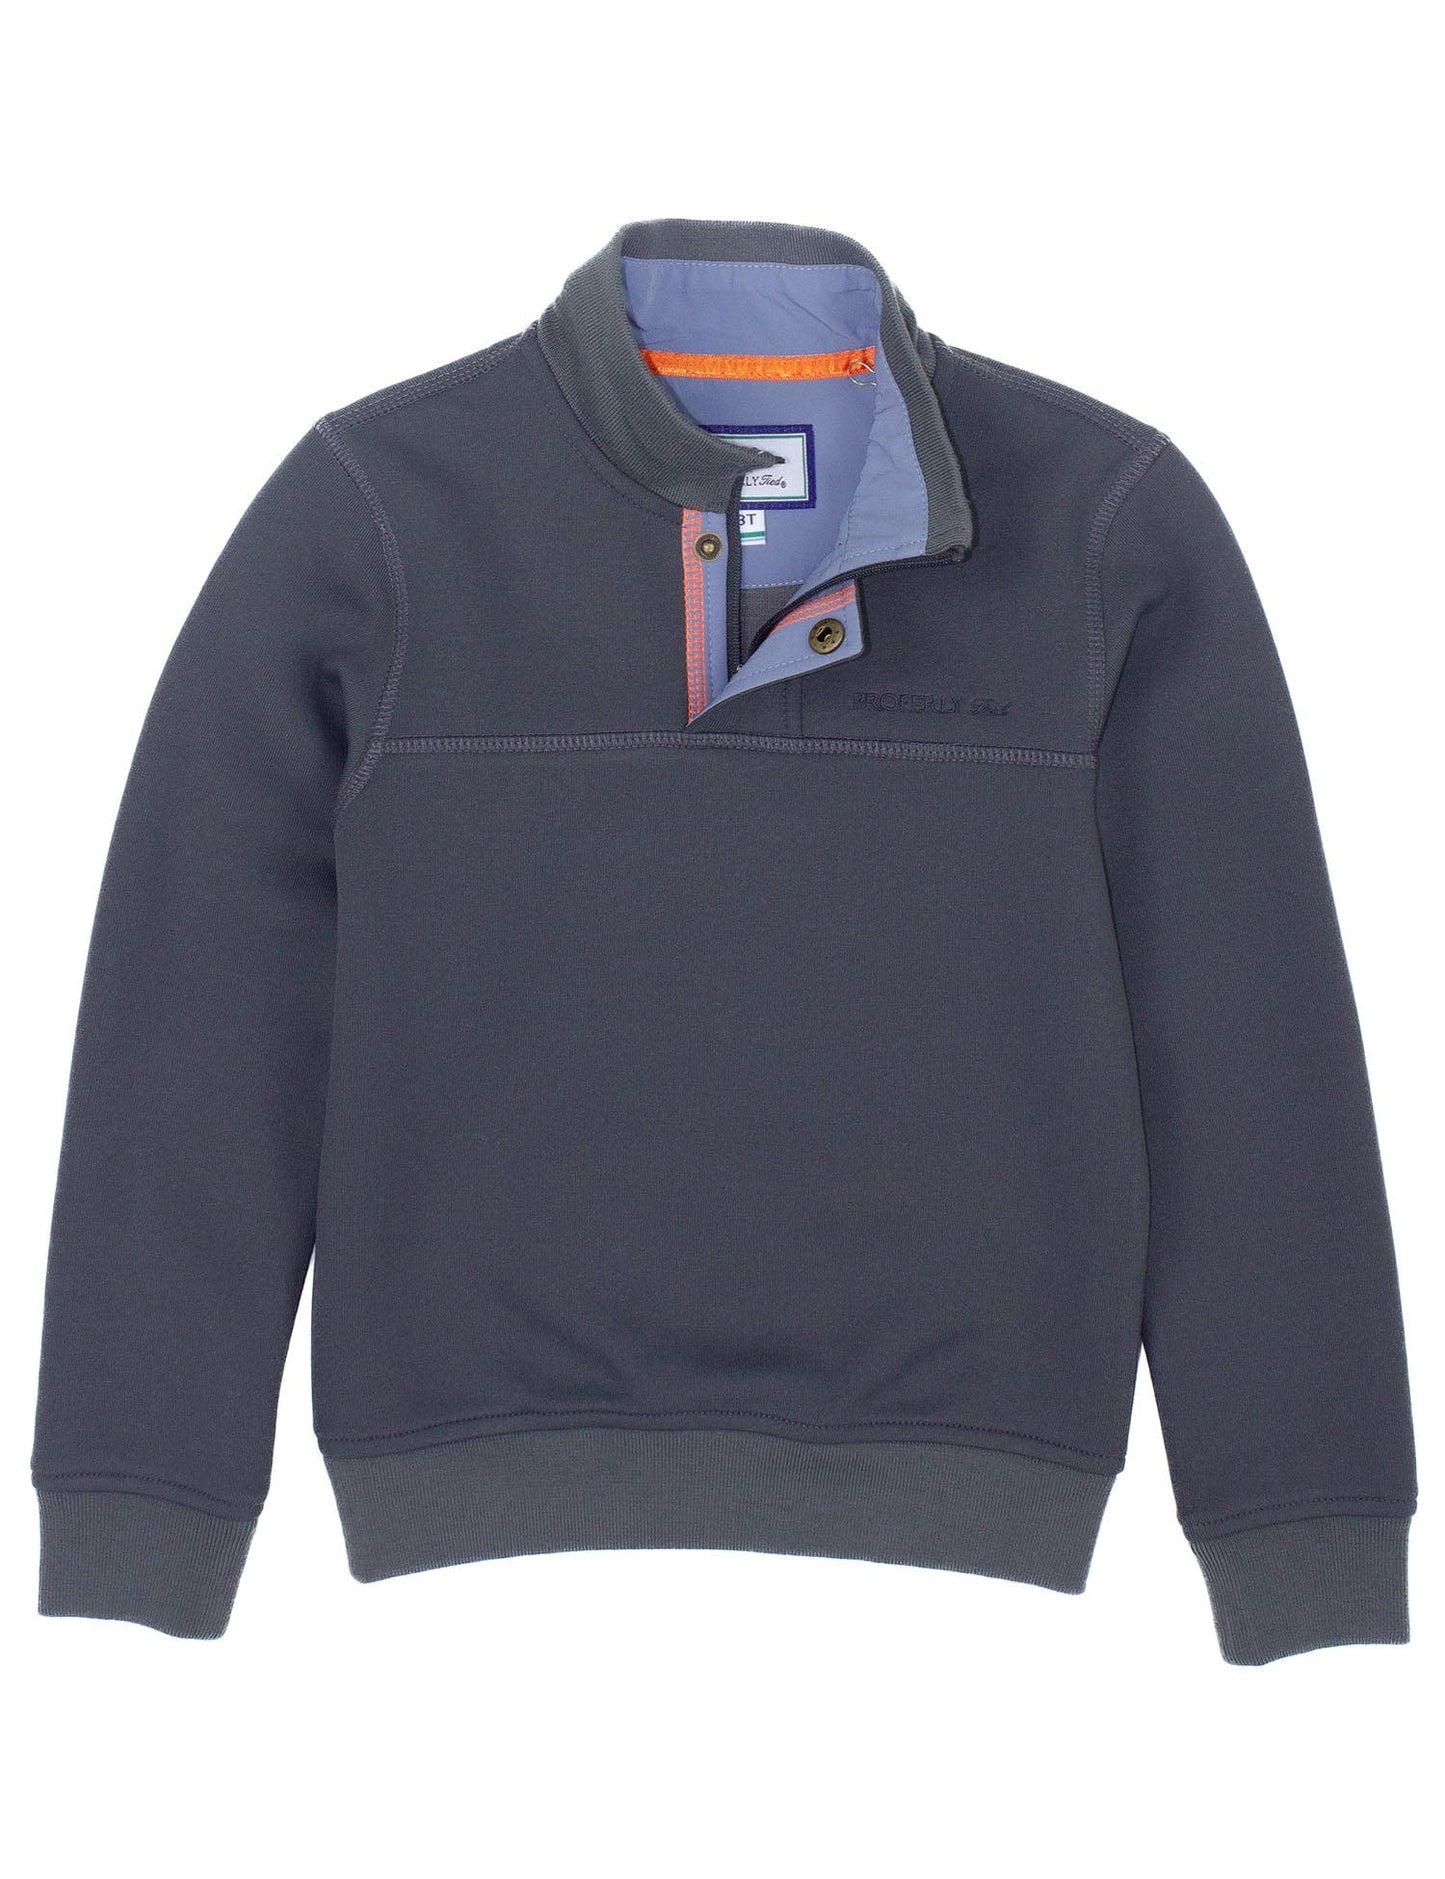 Kennedy Pullover - Charcoal